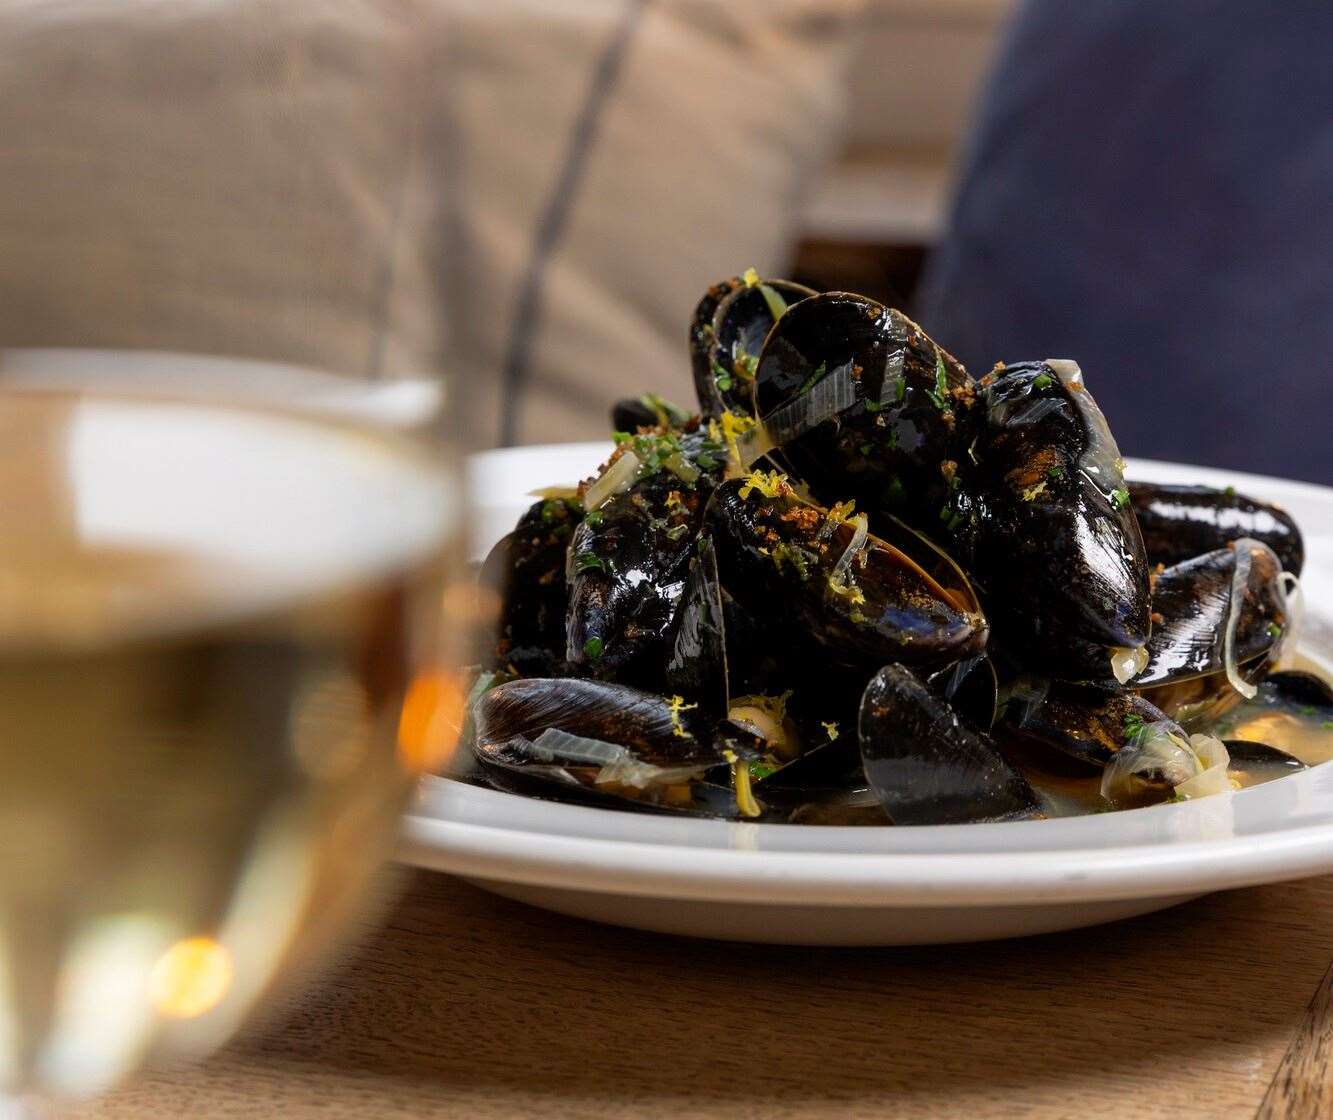 The Zetland Arms' mussels with leeks, Kent cider and shallots. Picture: Shepherd Neame